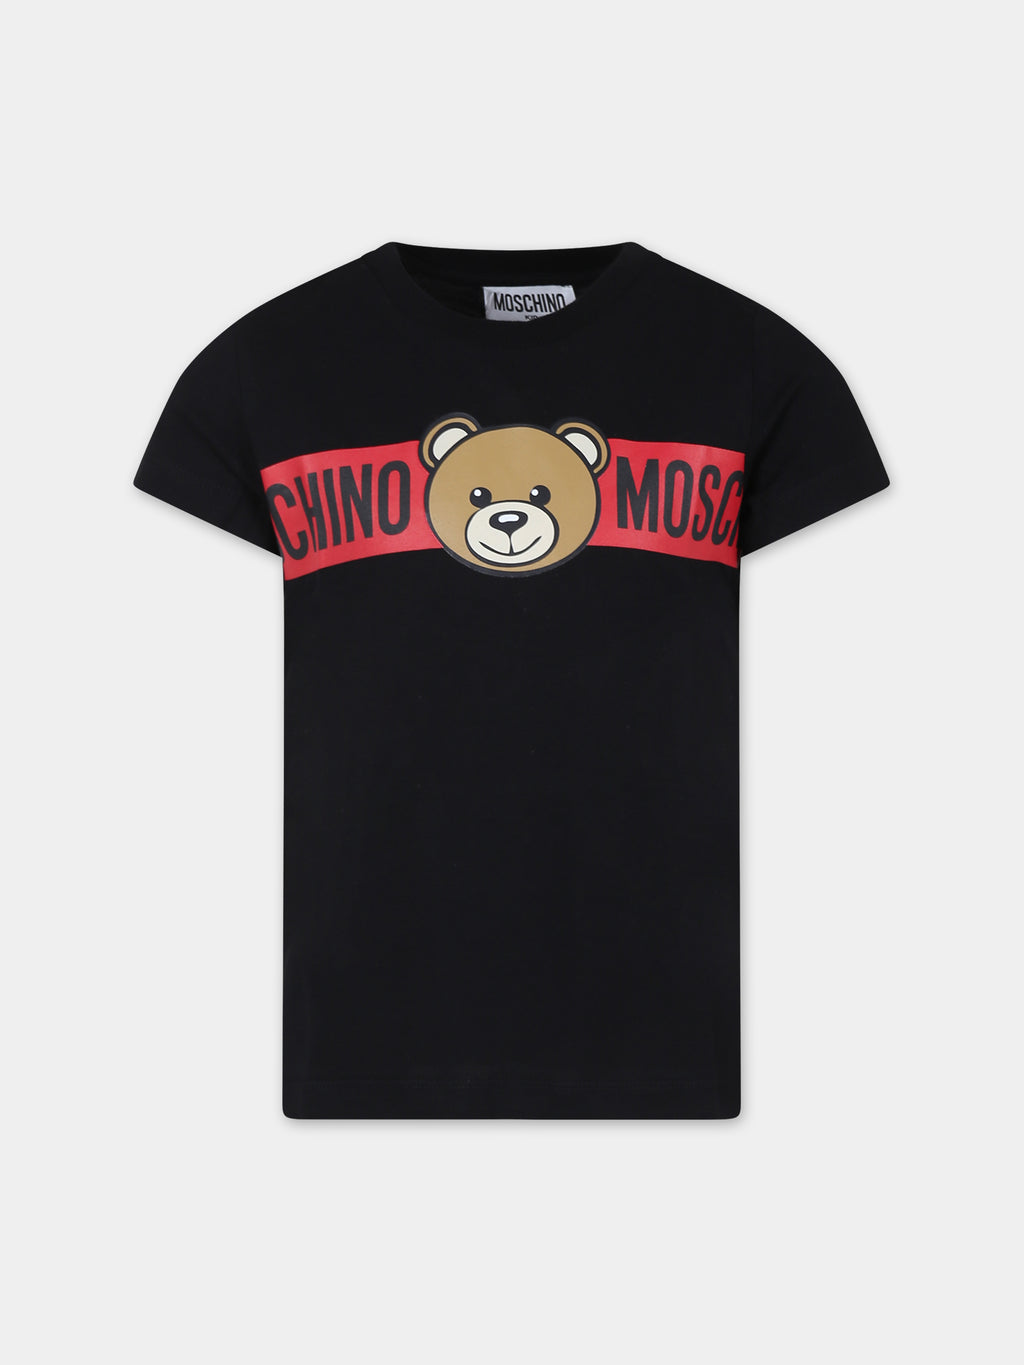 Black t-shirt for kids with Teddy Bear and logo